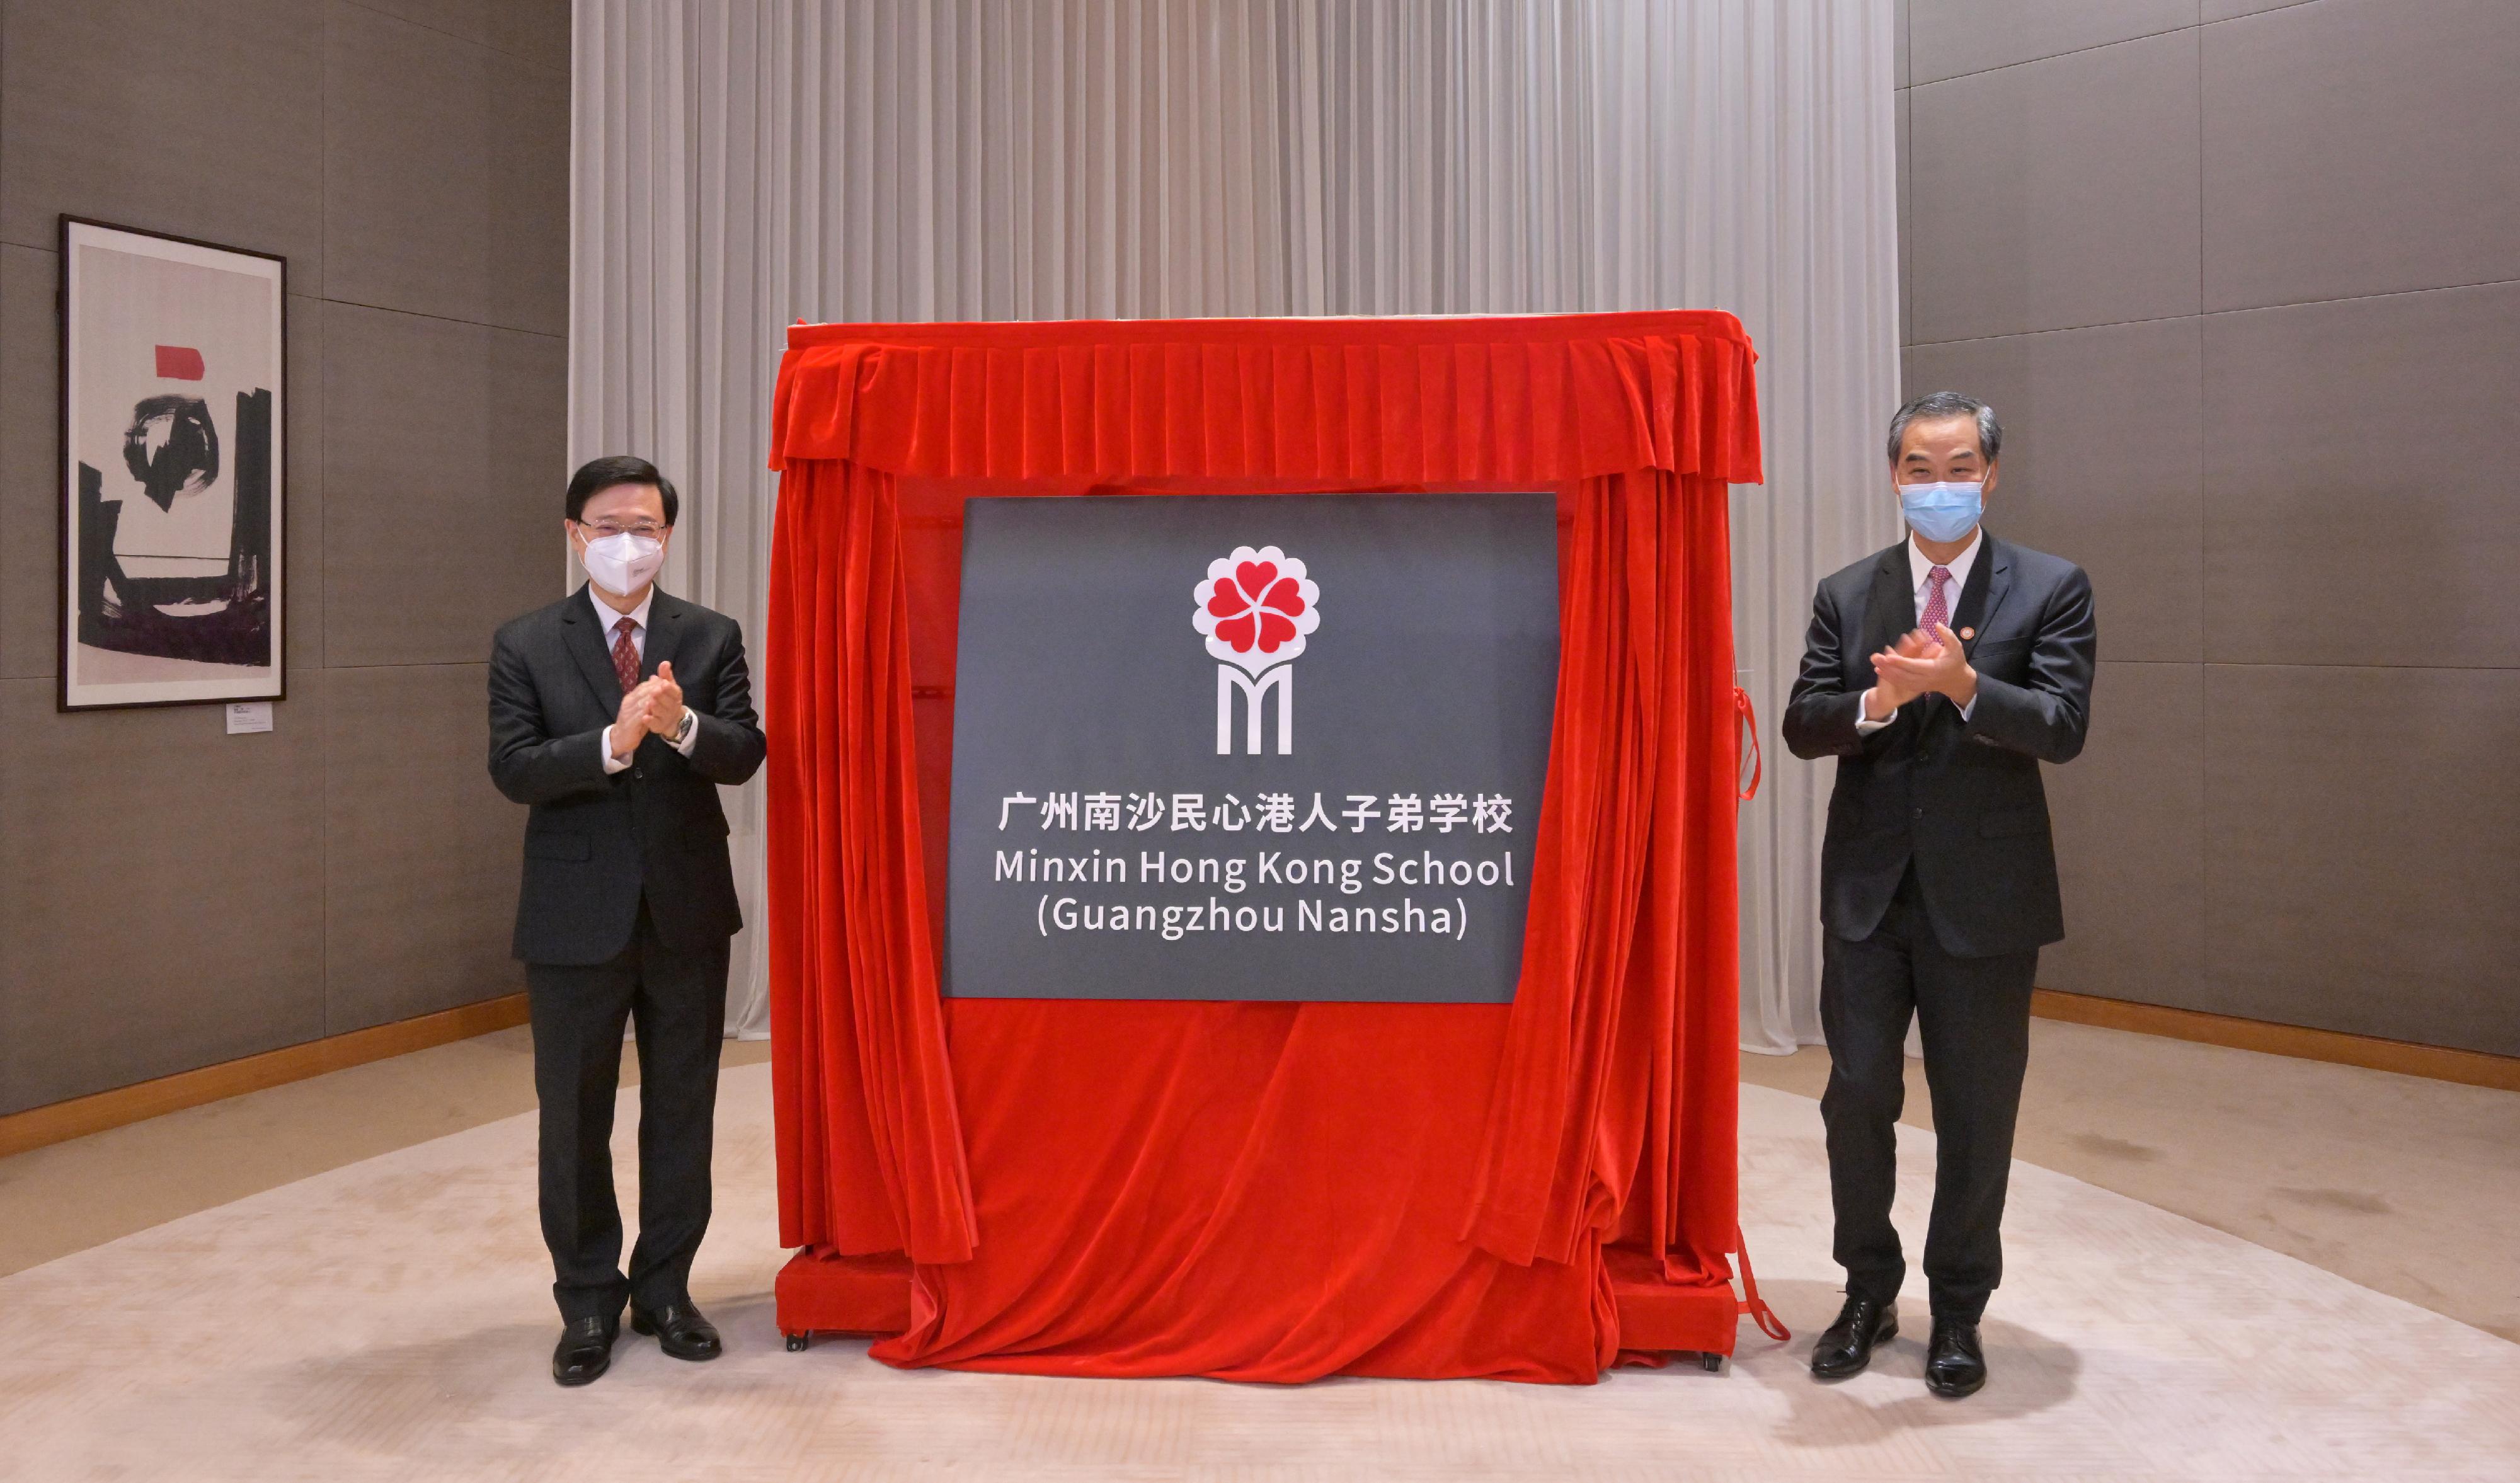 The Chief Executive, Mr John Lee, attended the opening ceremony of Minxin Hong Kong School in Nansha, Guangzhou, in the form of video conferencing today (September 1). Photo shows Mr Lee (left) and Vice-Chairman of the National Committee of the Chinese People's Political Consultative Conference and Chairperson of the School Board of Minxin Hong Kong School Mr C Y Leung (right), at the ceremony.